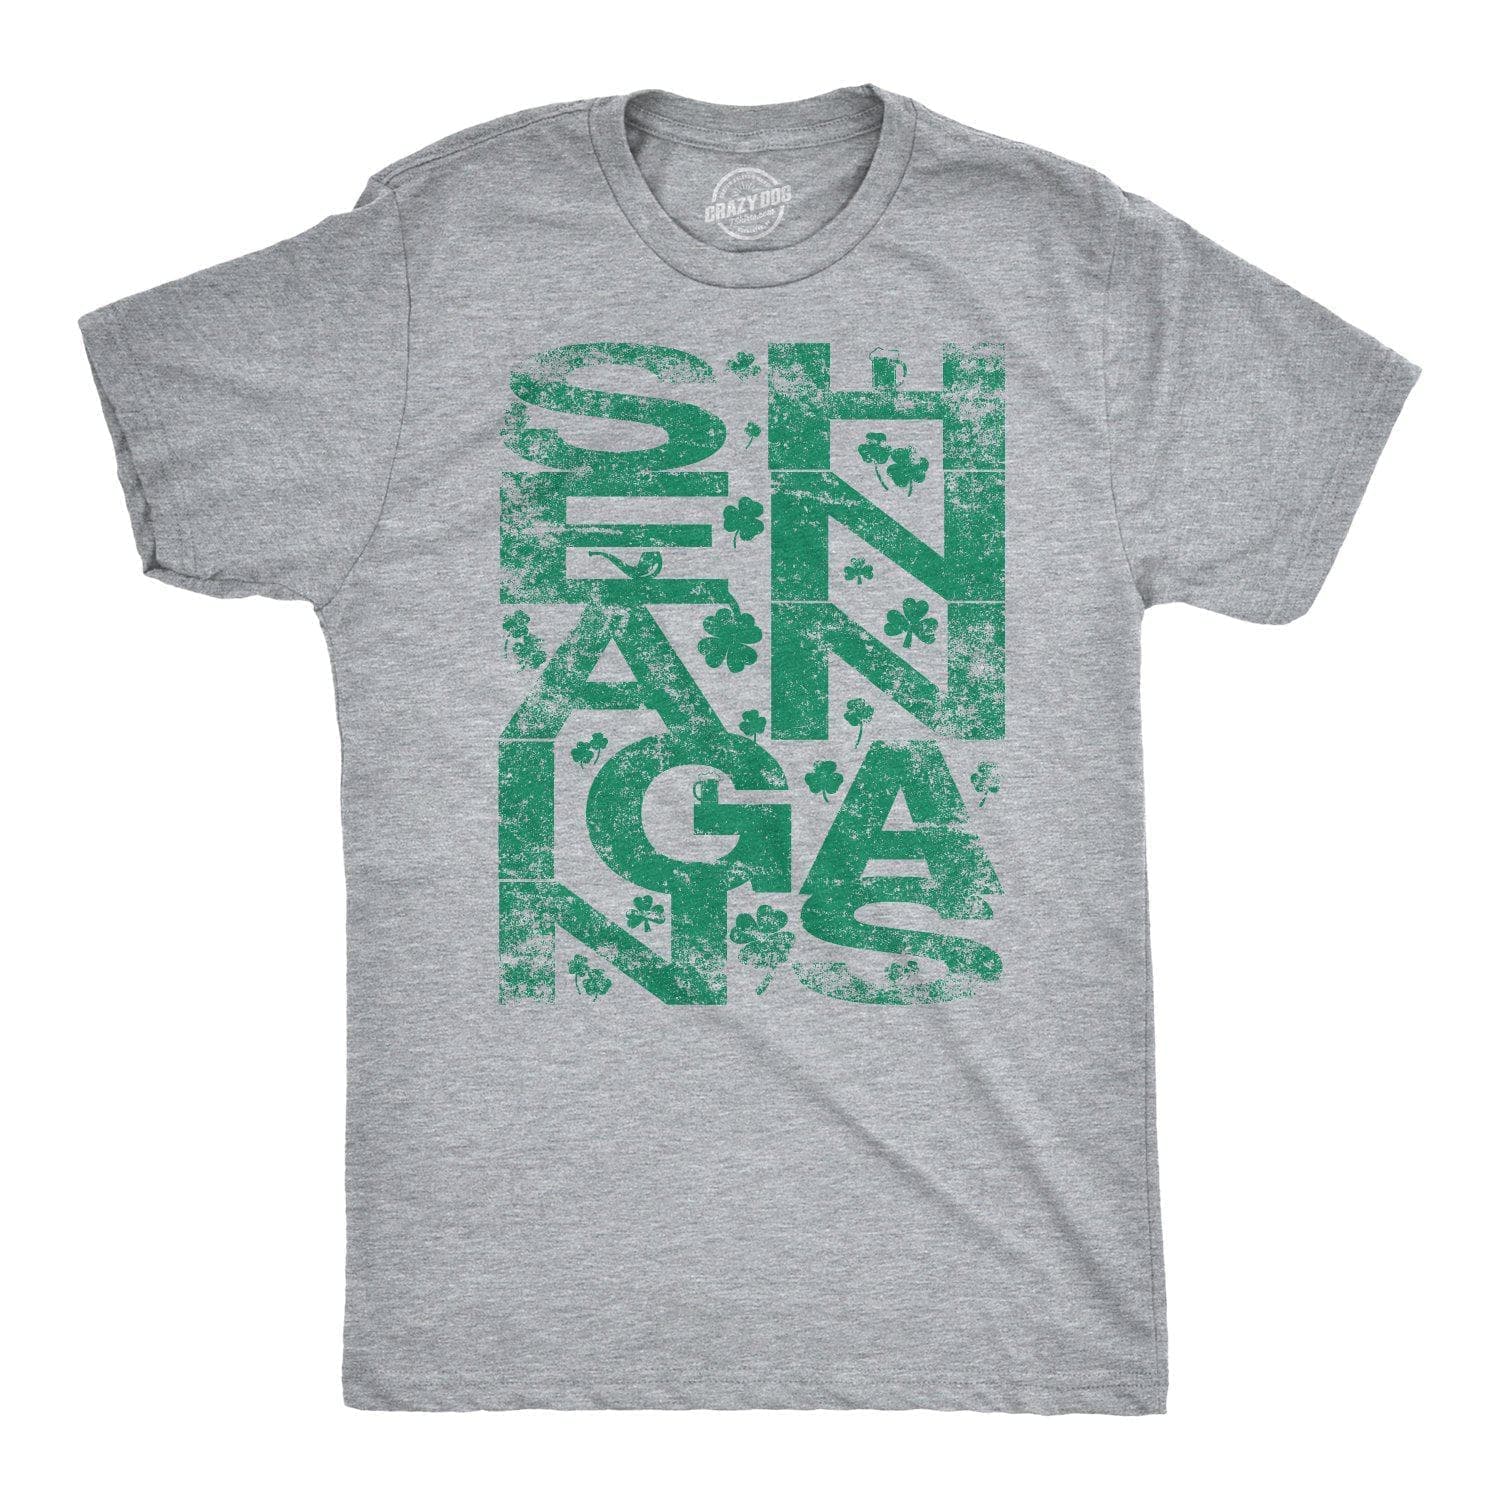 Shenanigans Covered In Clovers Men's Tshirt - Crazy Dog T-Shirts